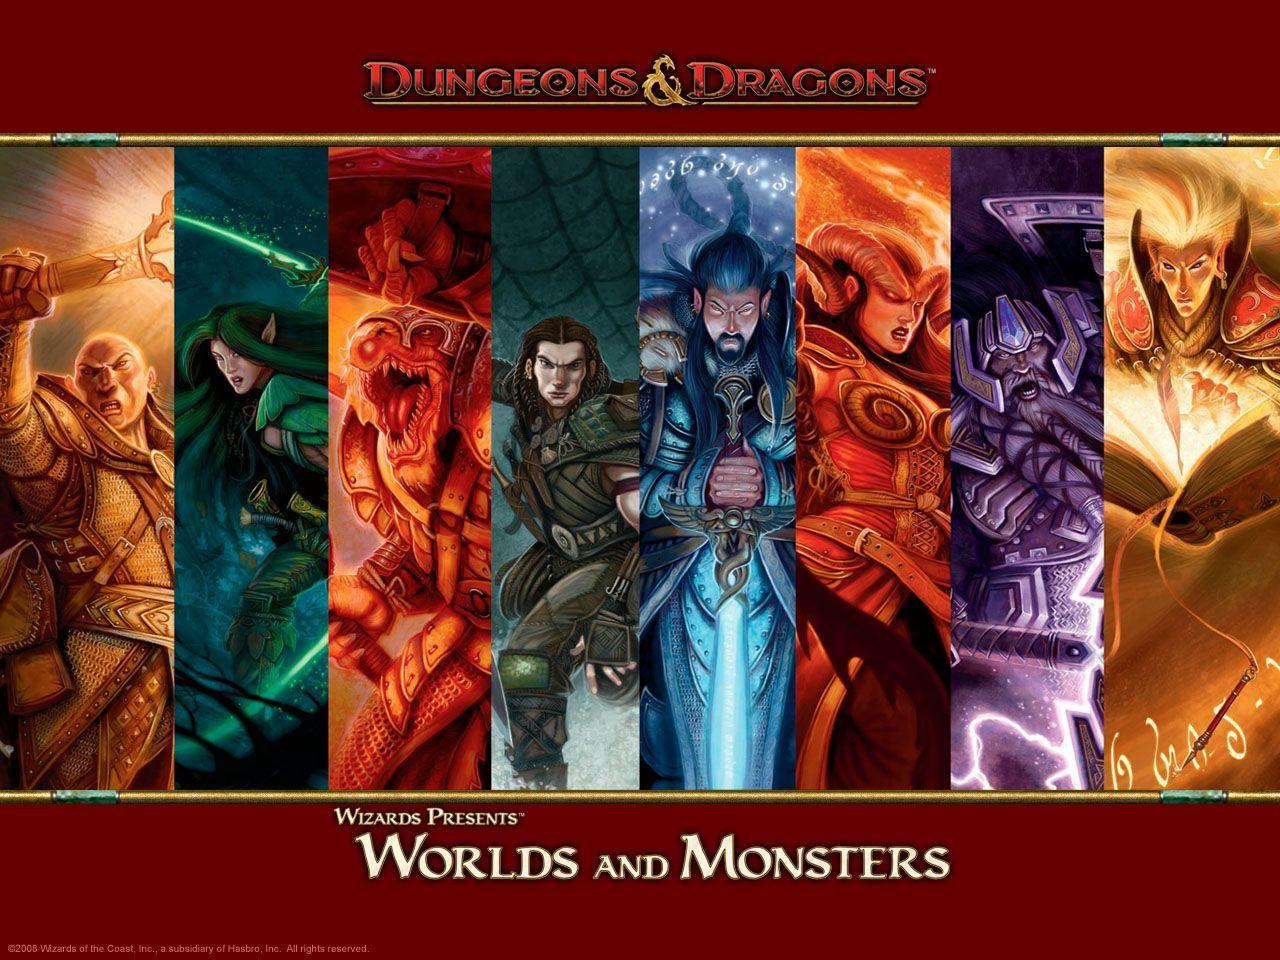 The Dungeons And Dragons Wallpaper. PicsWallpaper